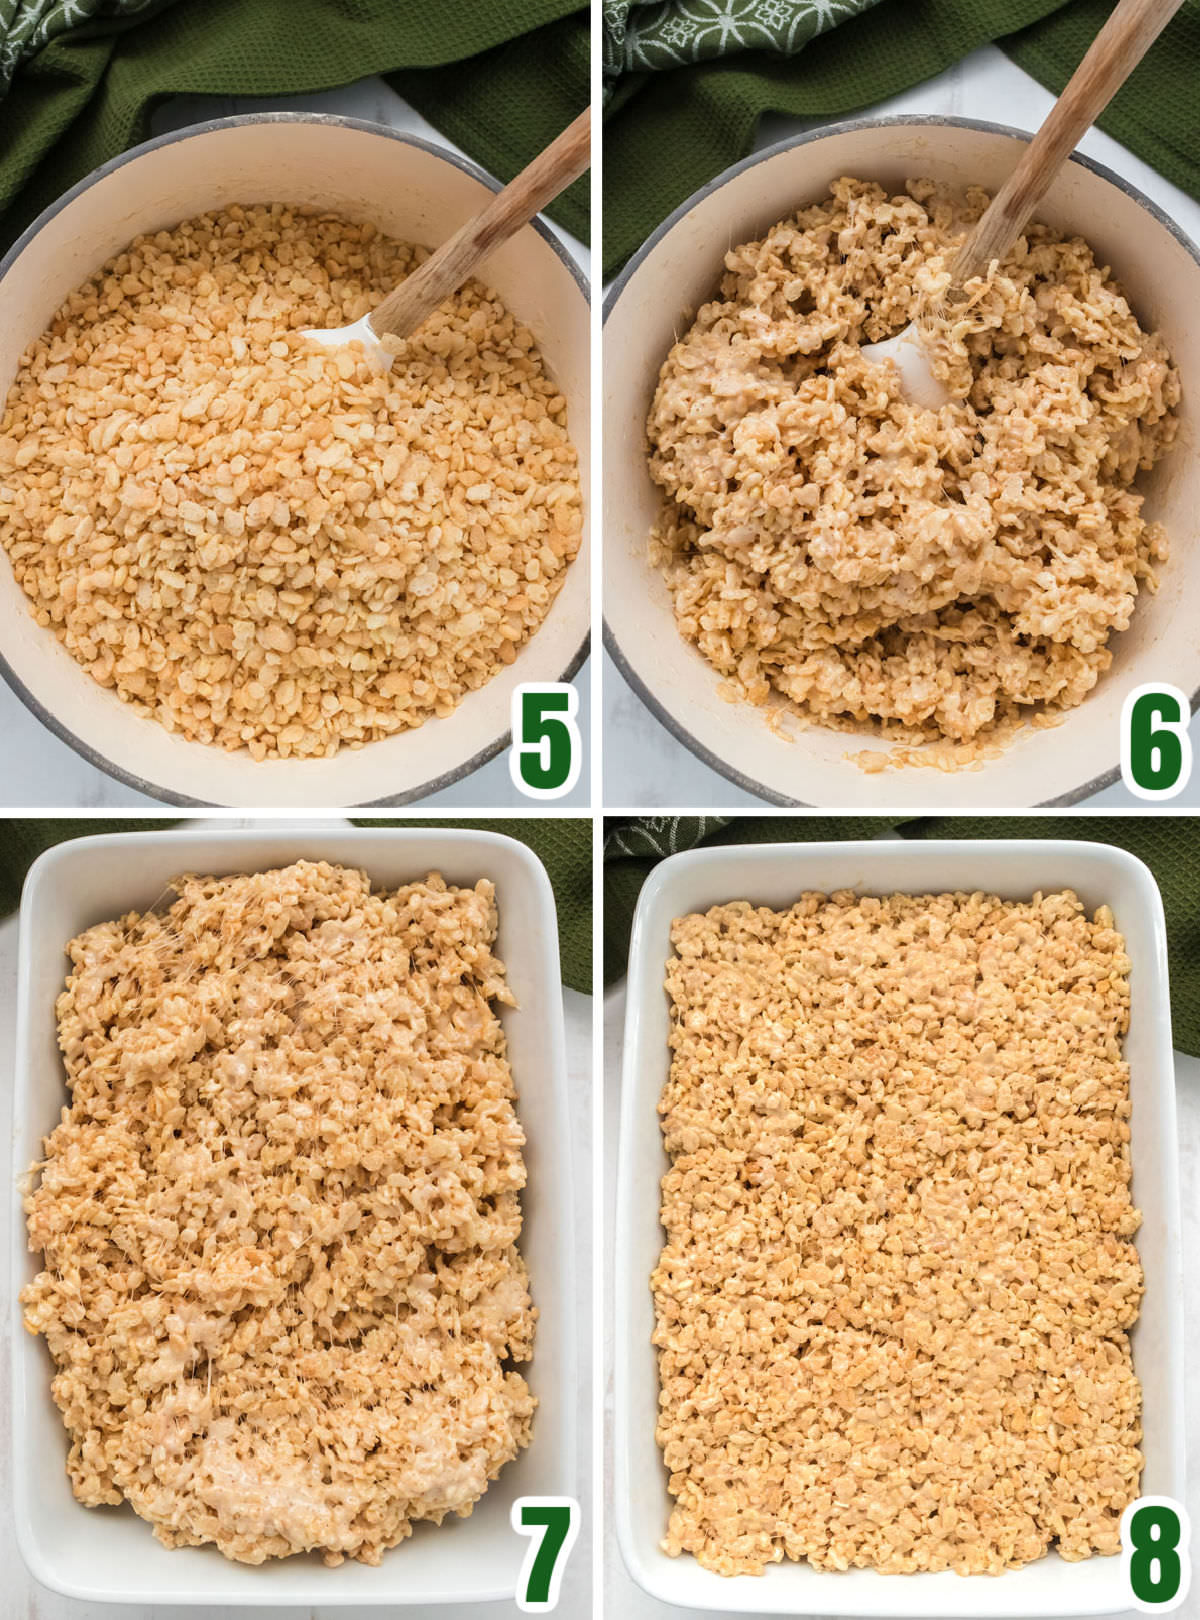 Collage image showing the steps for adding the Rice Krispie Cereal to the marshmallow mixture and pressing it into a 9x13" pan.